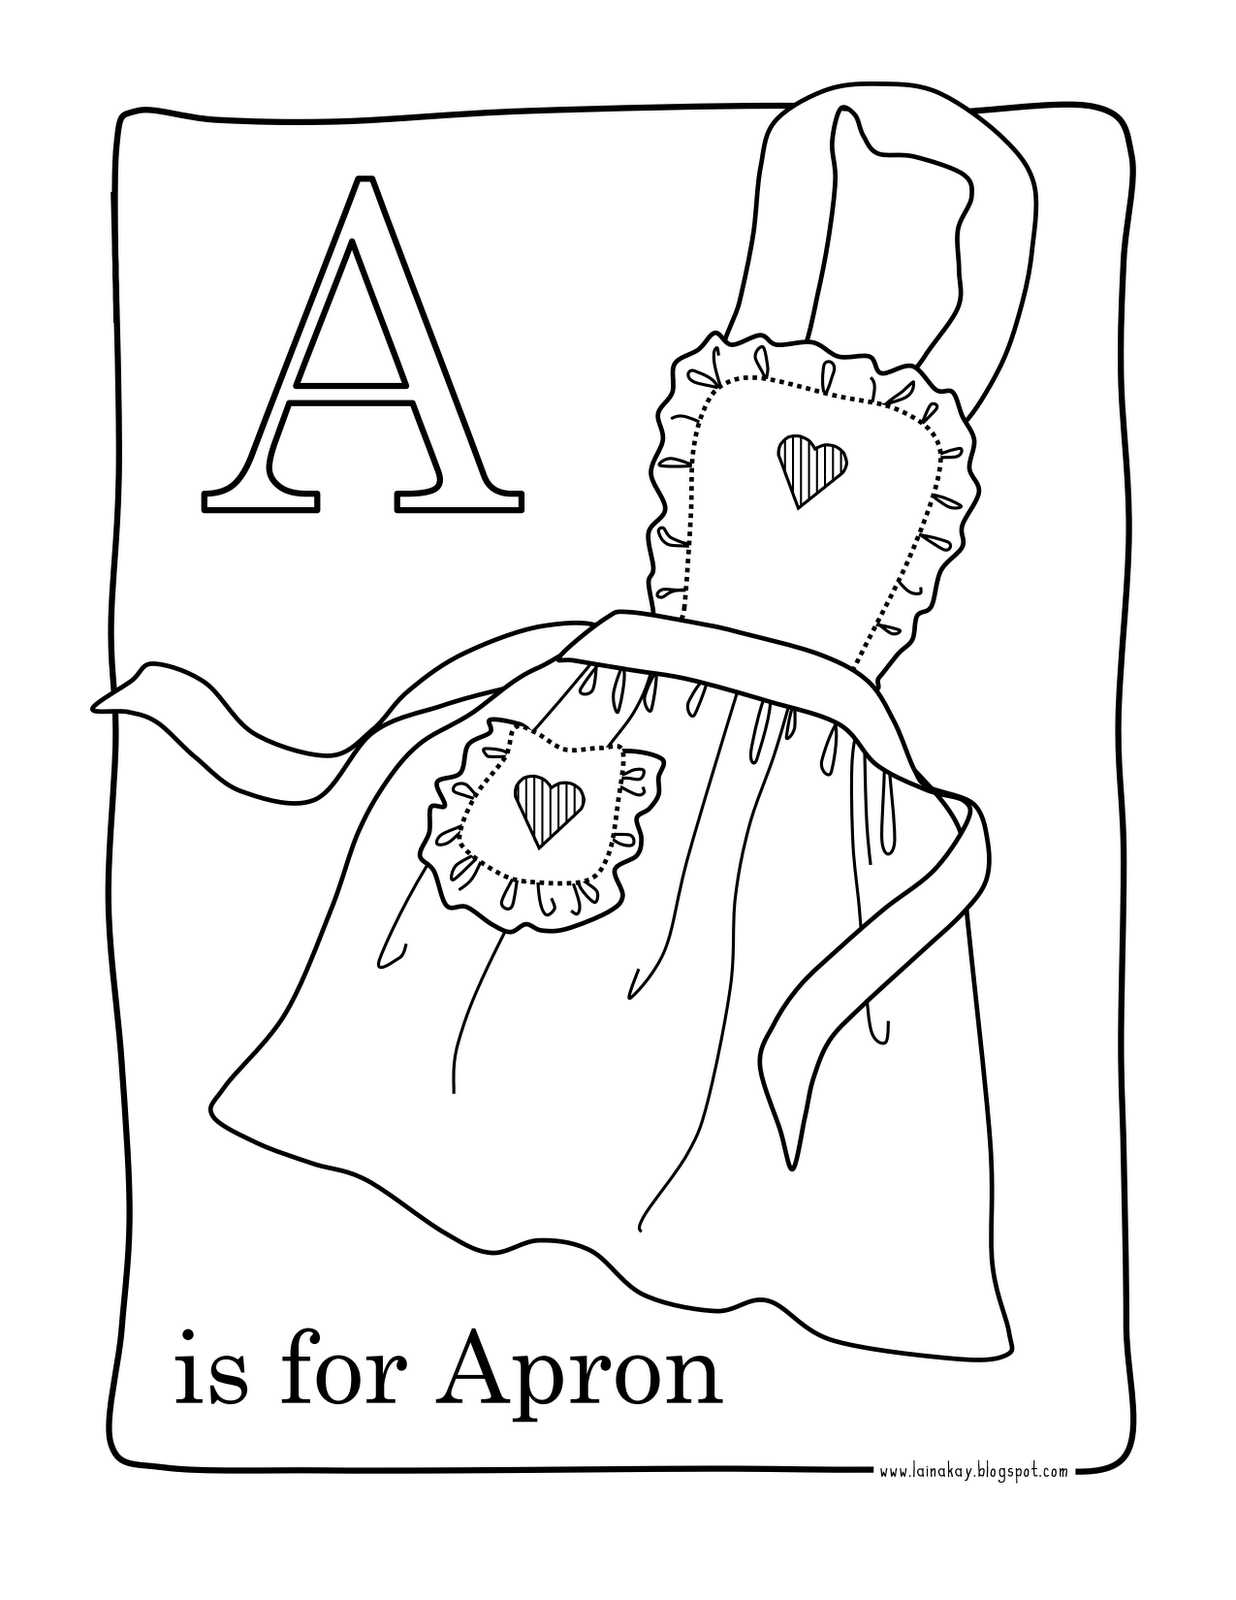 Printable Letter Worksheets for Preschoolers together with Goodness Gracious A is for Apron